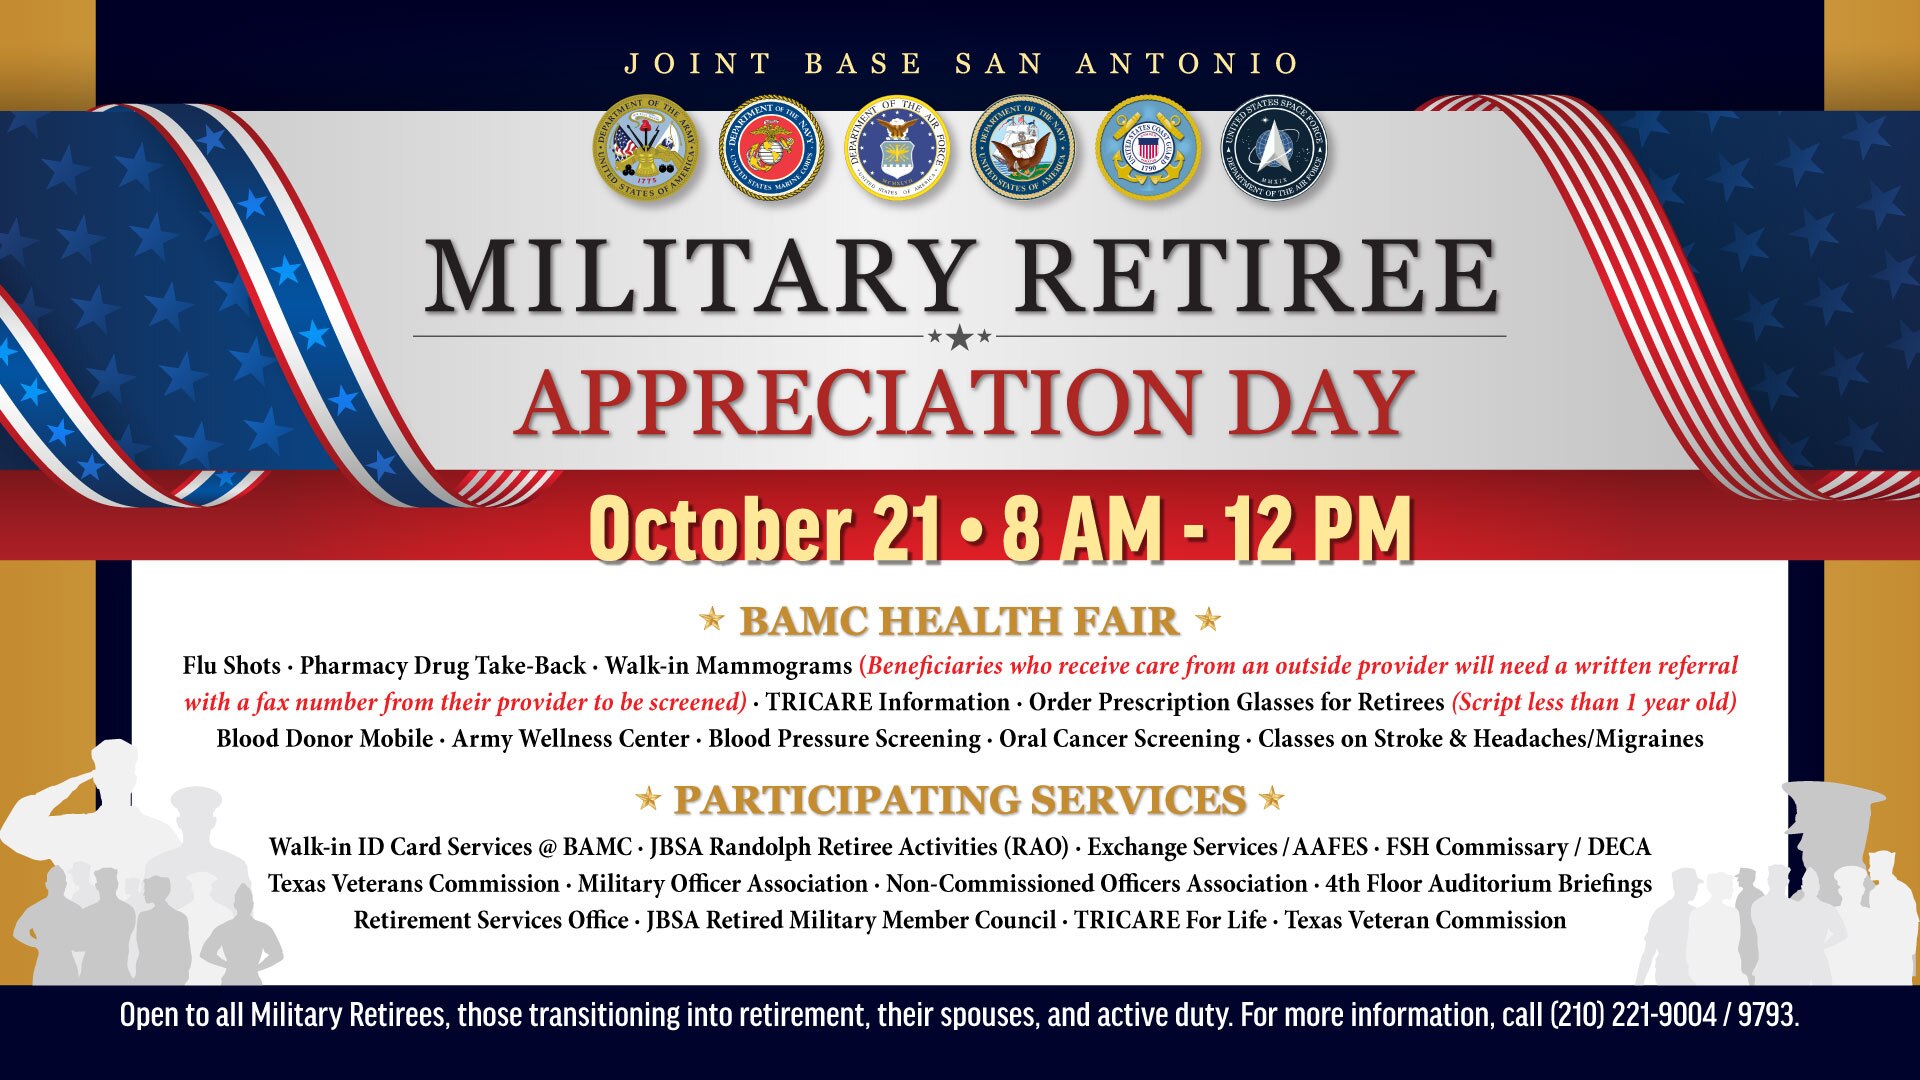 BAMC opens doors for Military Retiree Appreciation Day > Joint